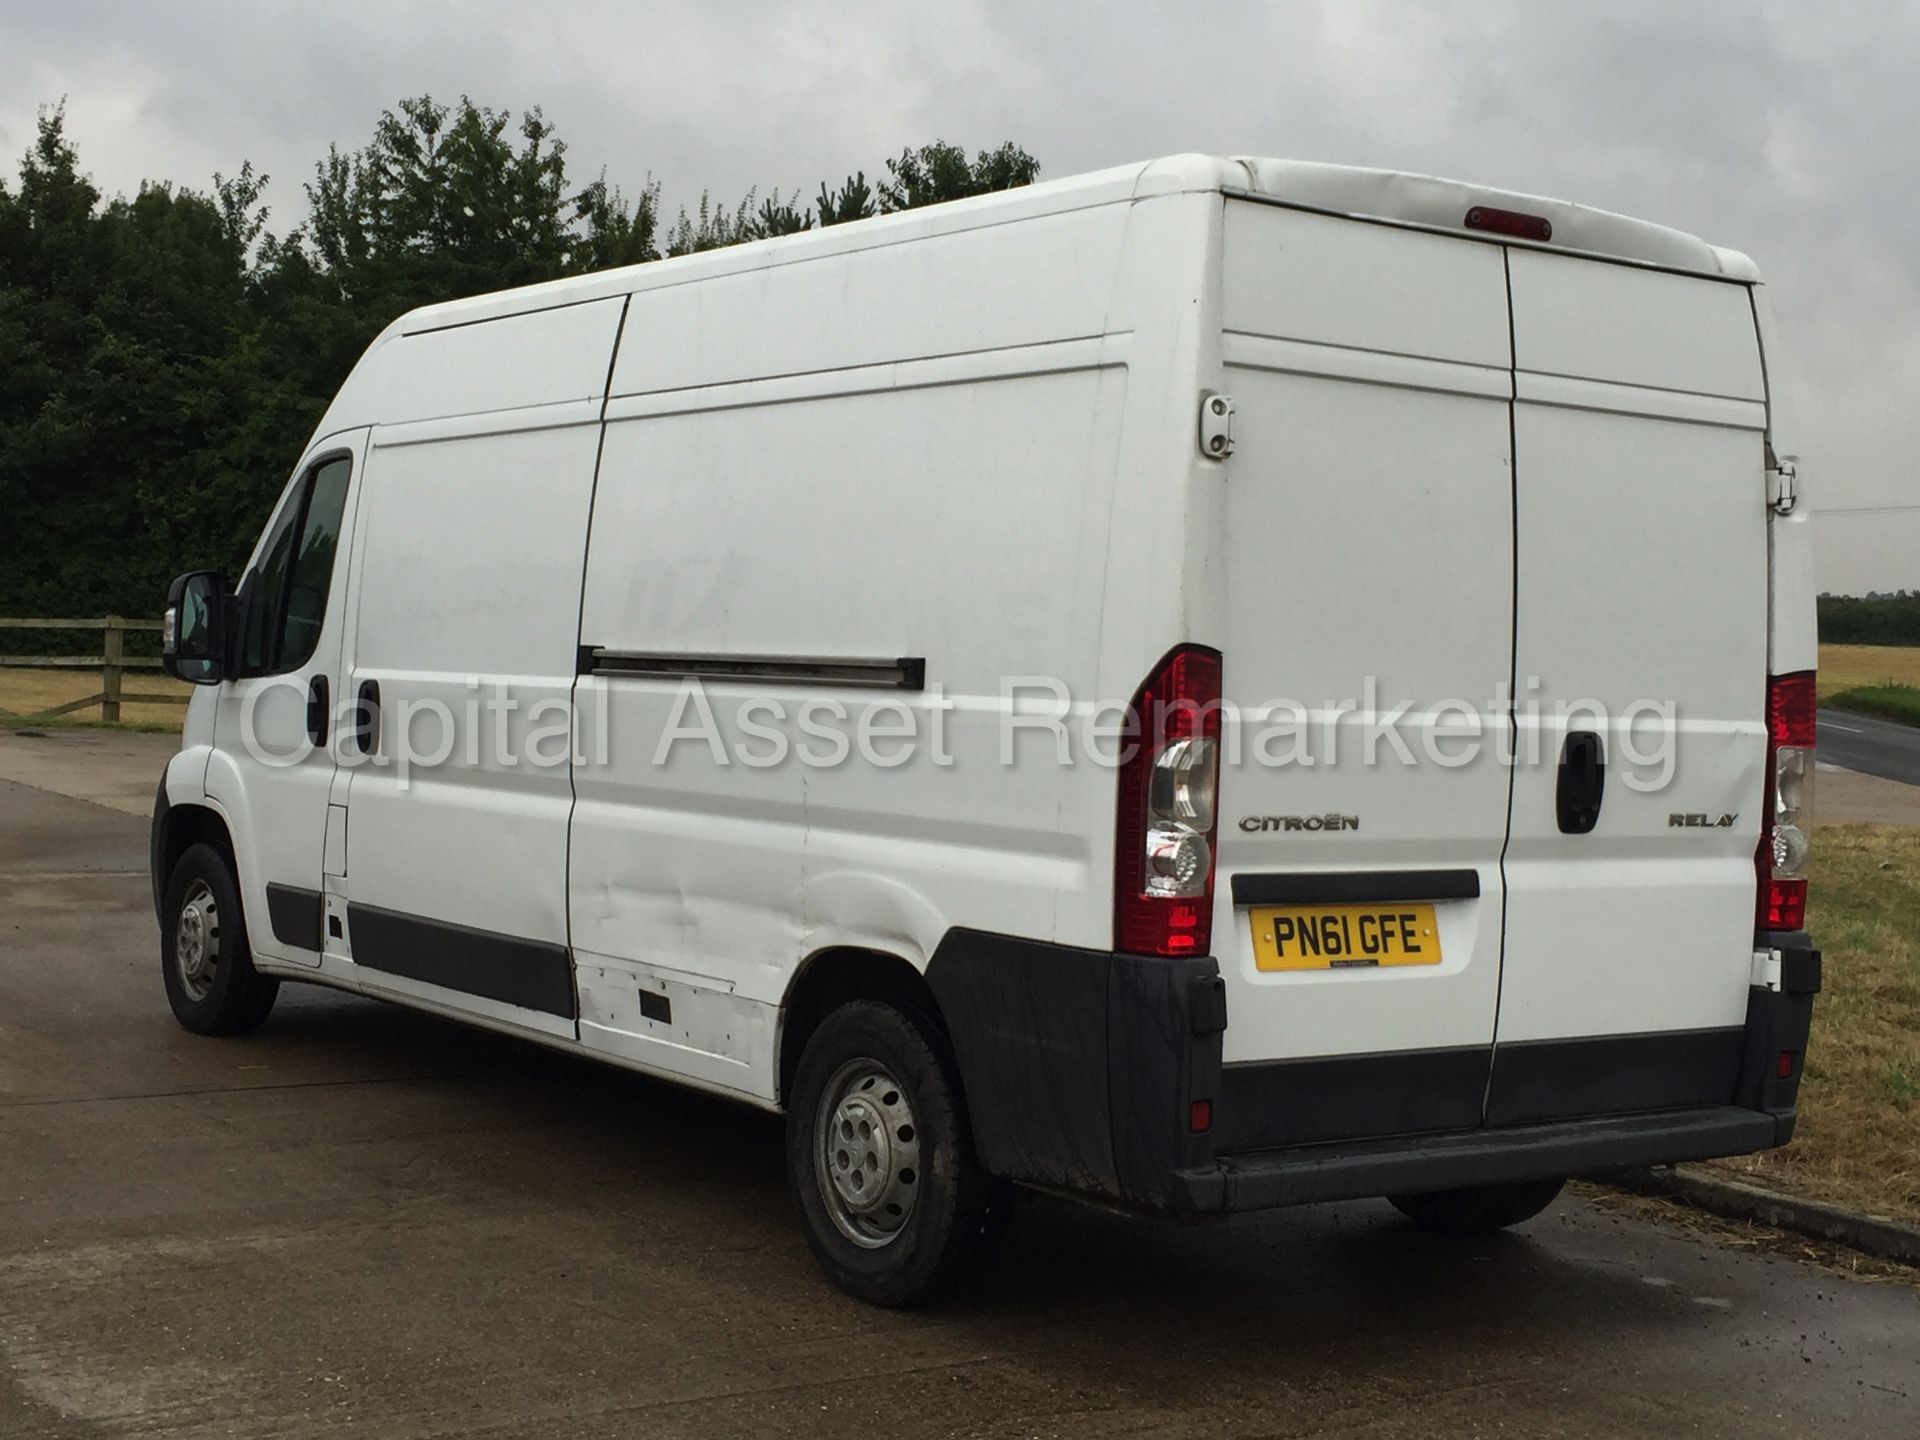 (ON SALE) CITROEN RELAY 35 'LWB HI-ROOF' (2012 MODEL) '2.2 HDI - 120 BHP - 6 SPEED' (1 FORMER OWNER) - Image 6 of 19